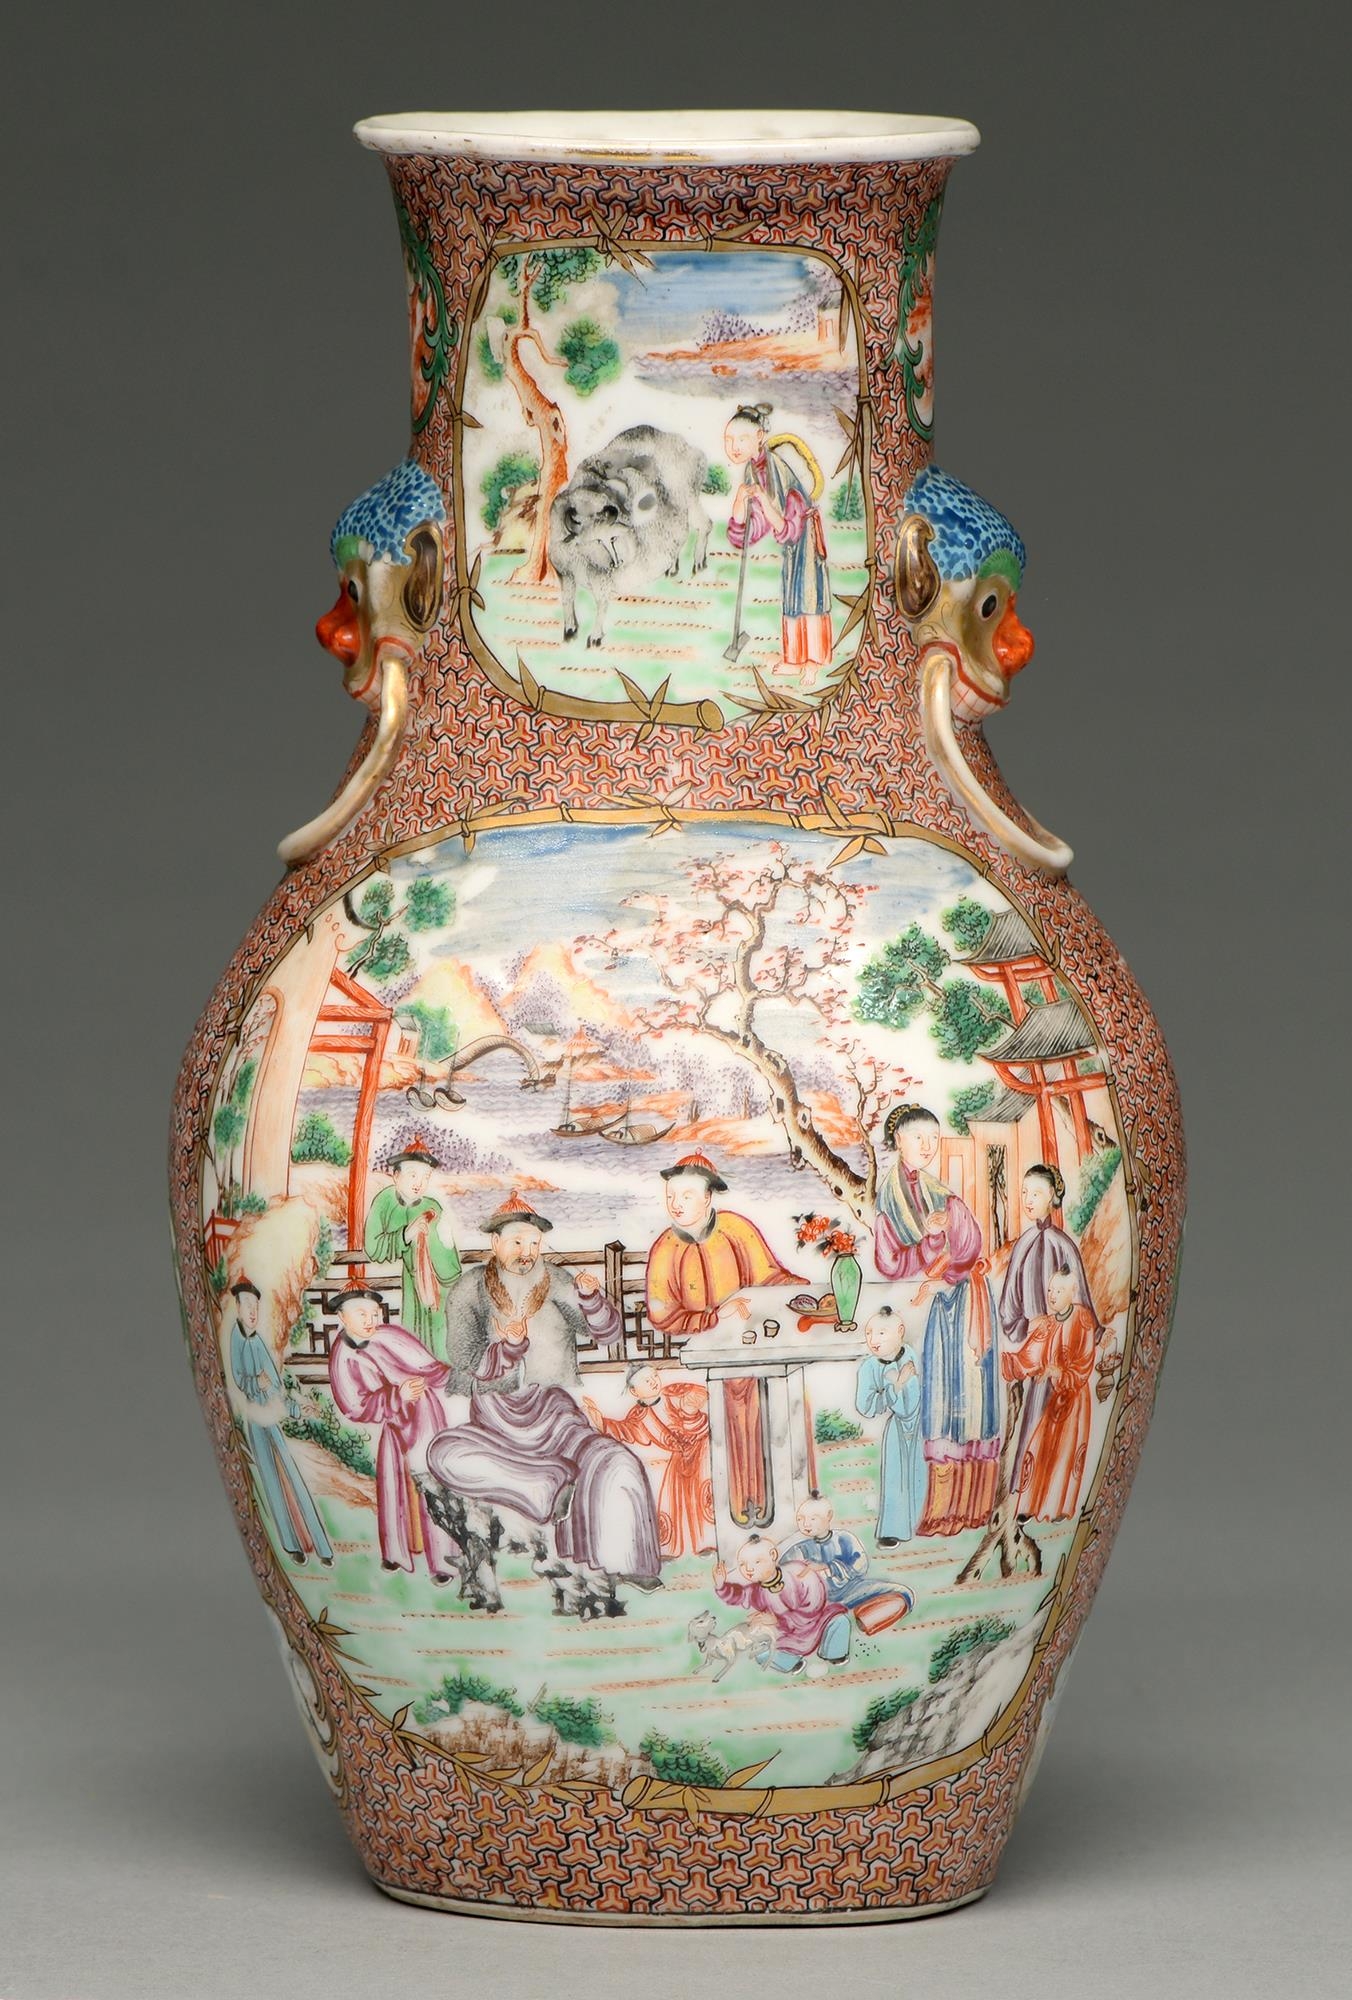 A Chinese famille rose vase, c1770, enamelled and with 'mandarin' scenes in gilt bamboo frames